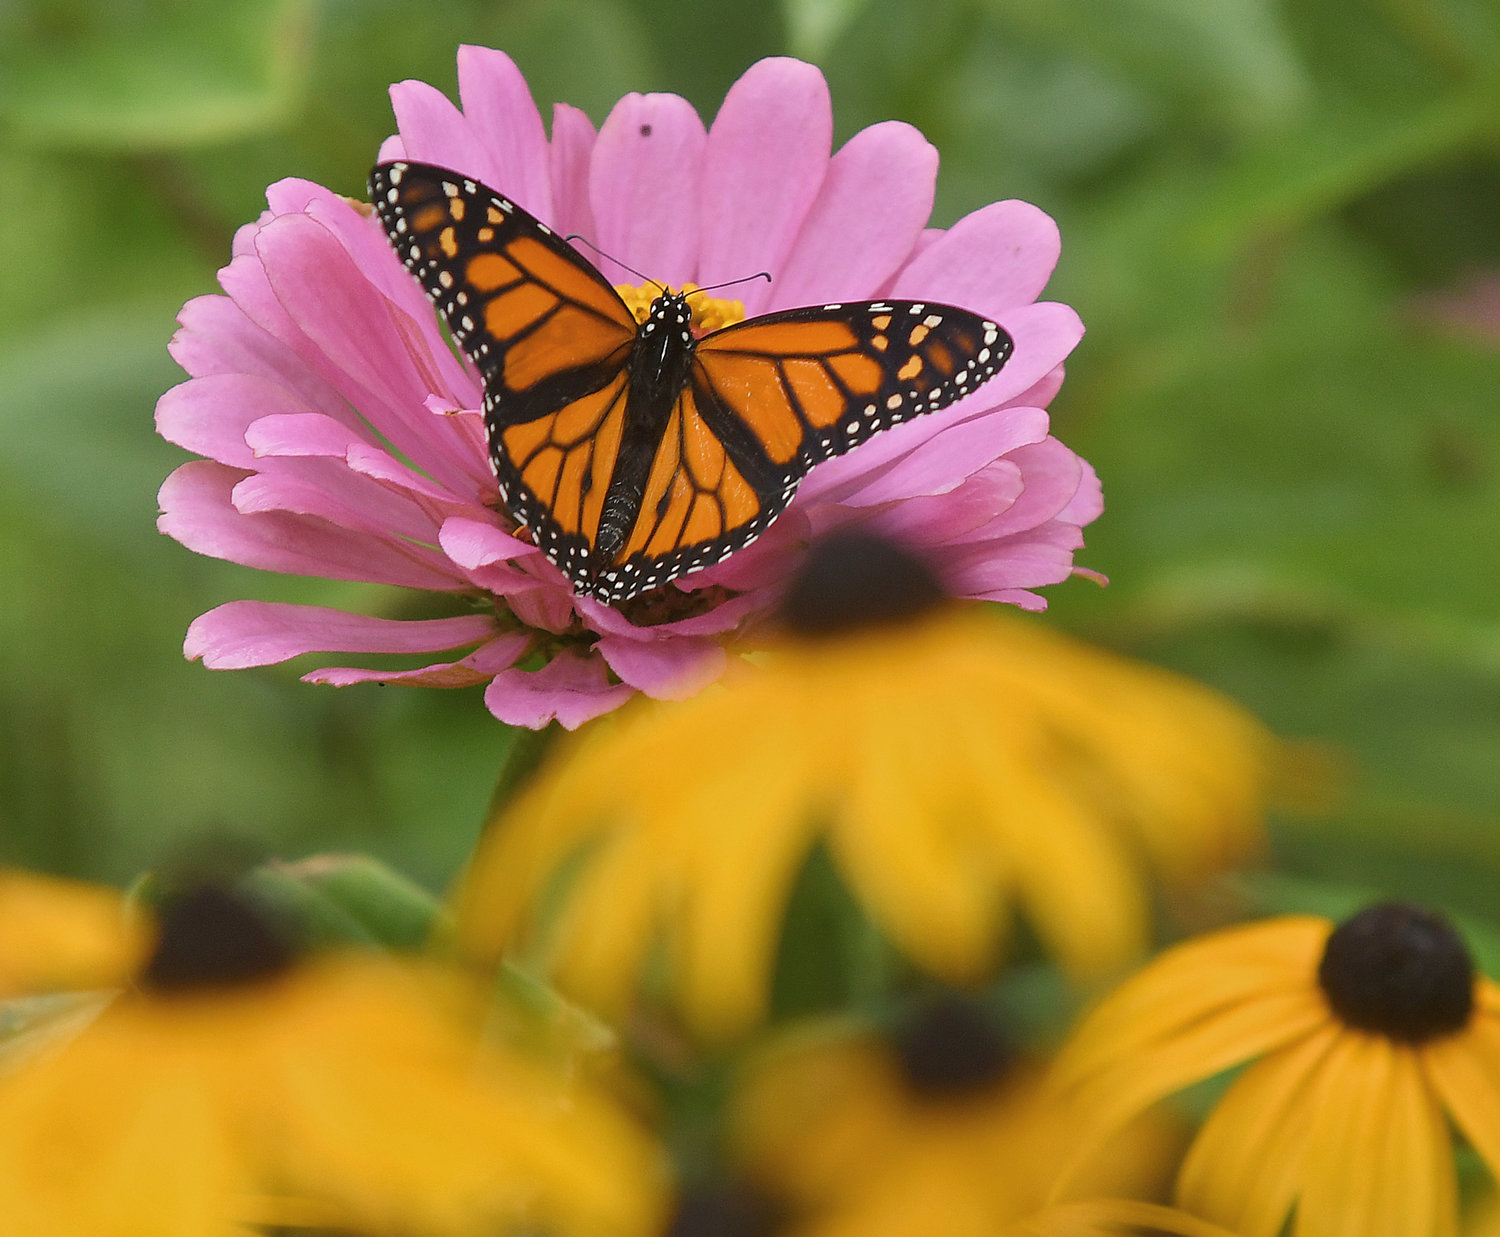 One of the 12 Monarch butterflies that have a new home in the Butterfly House at Cornell Cooperative Extension in Oriskany found a spot on a pink zinnia.